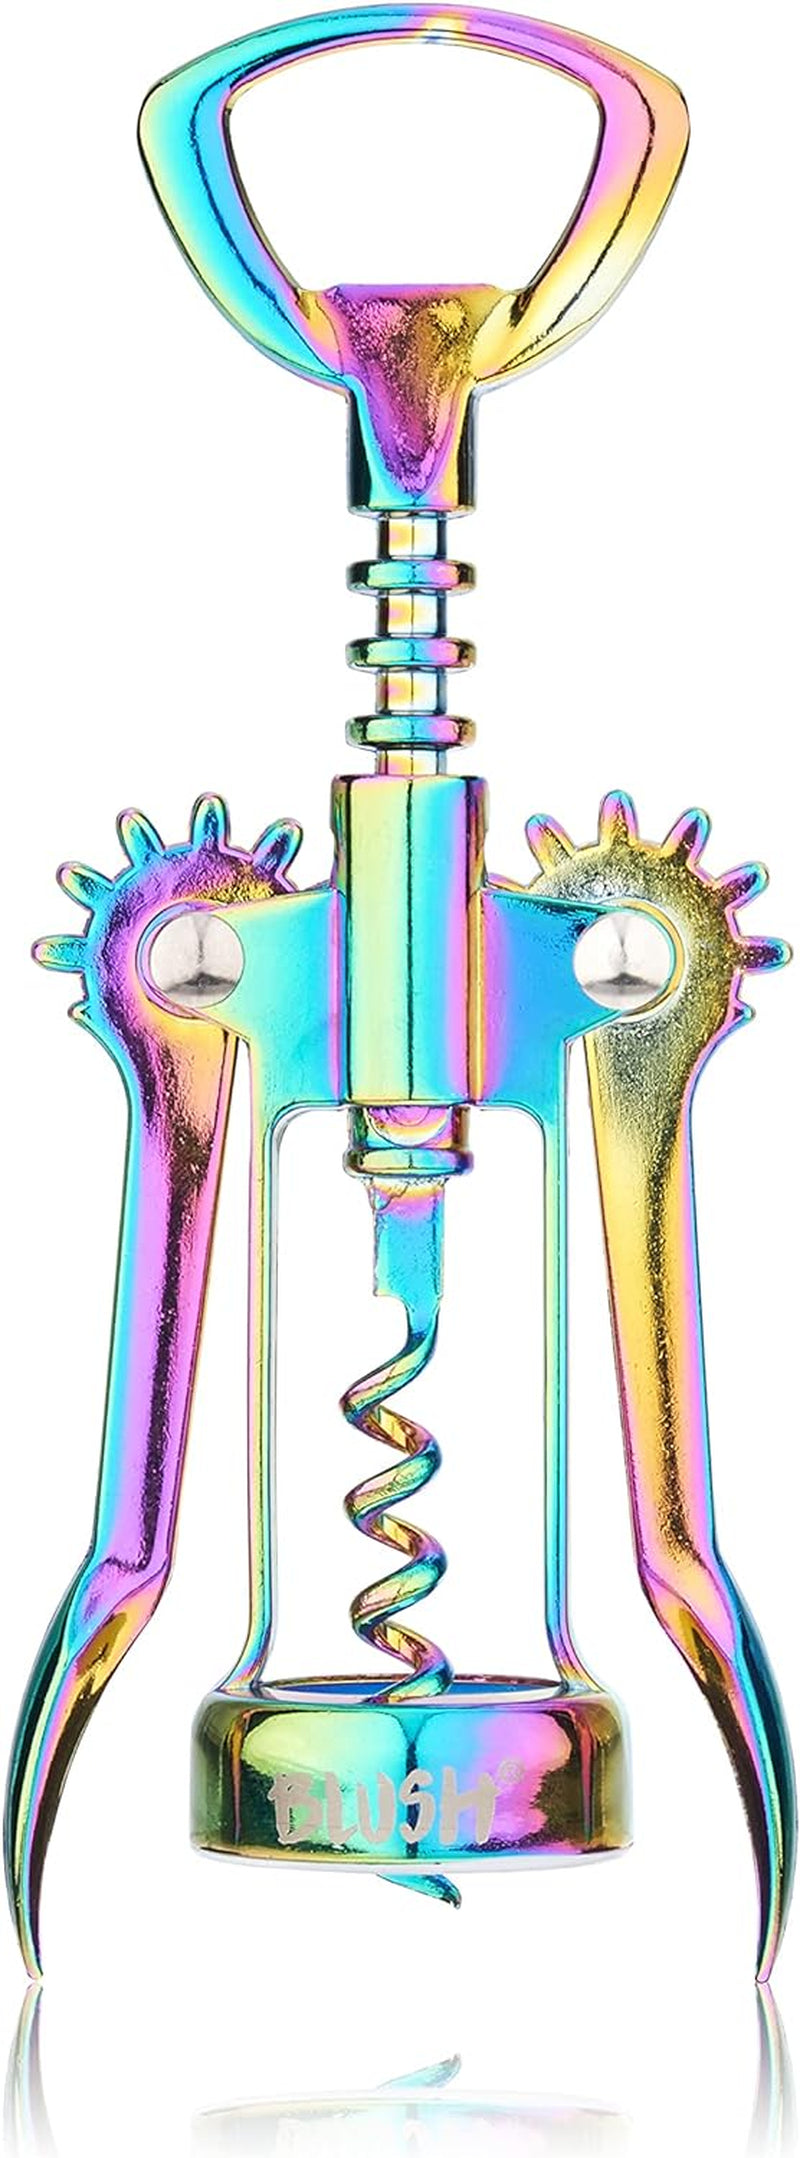 Blush Mirage Double Hinged Corkscrew, Cute Iridescent Wine Bottle Opener and Foil Cutter, Stainless Steel Bar Accessories, 4.75 Inches Long, Set of 1